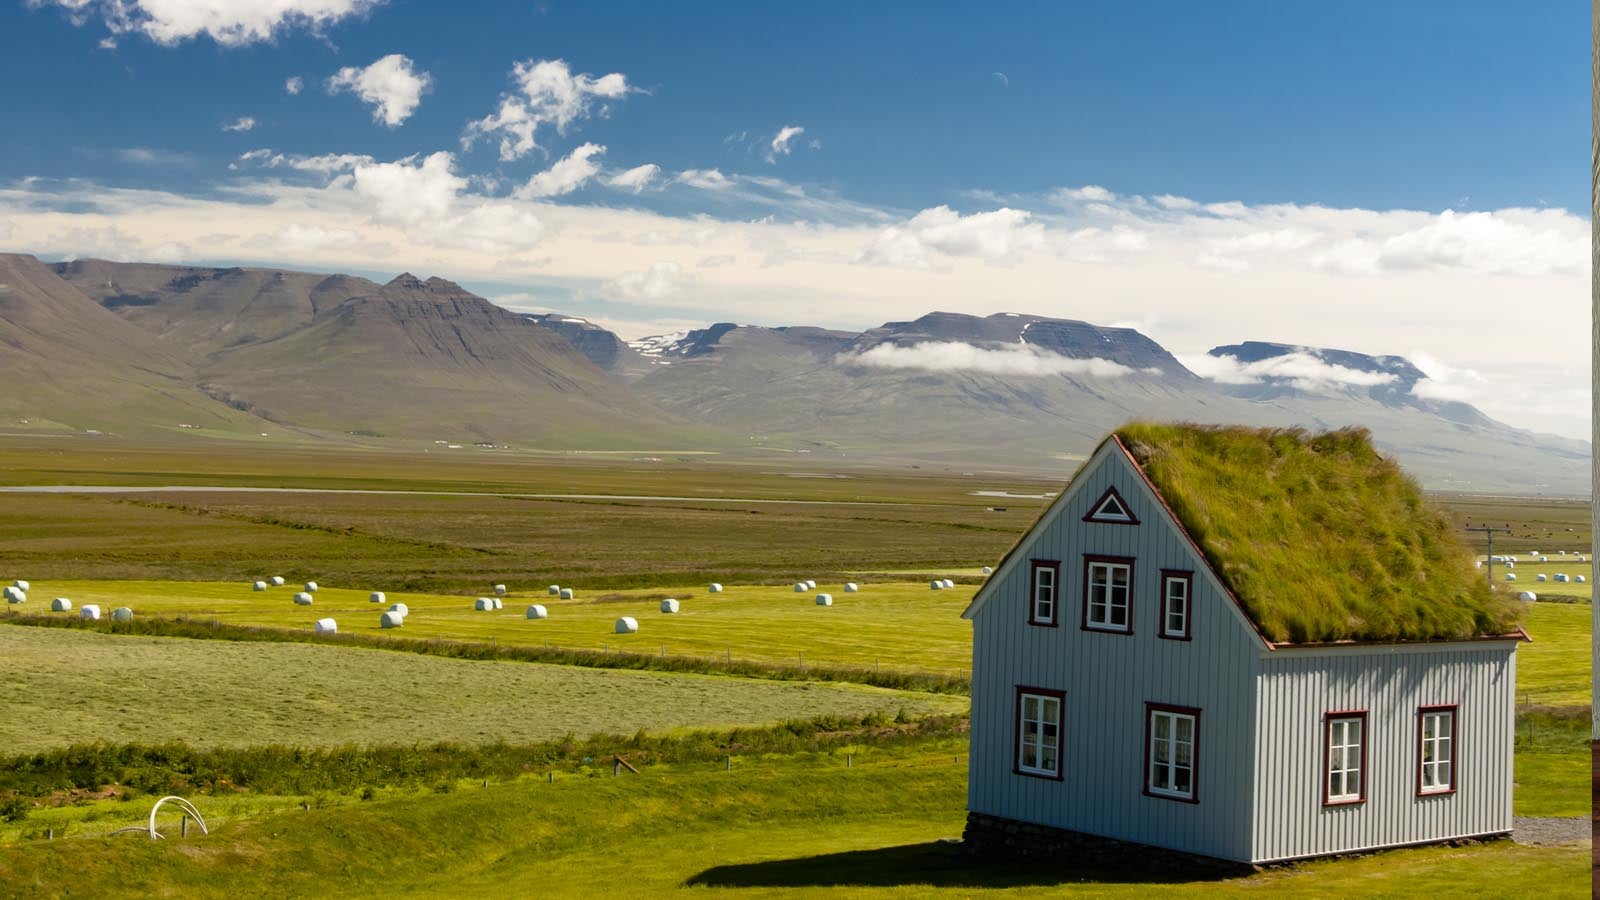 An Icelandic cottage overlooking green fields with mountains in the distance.